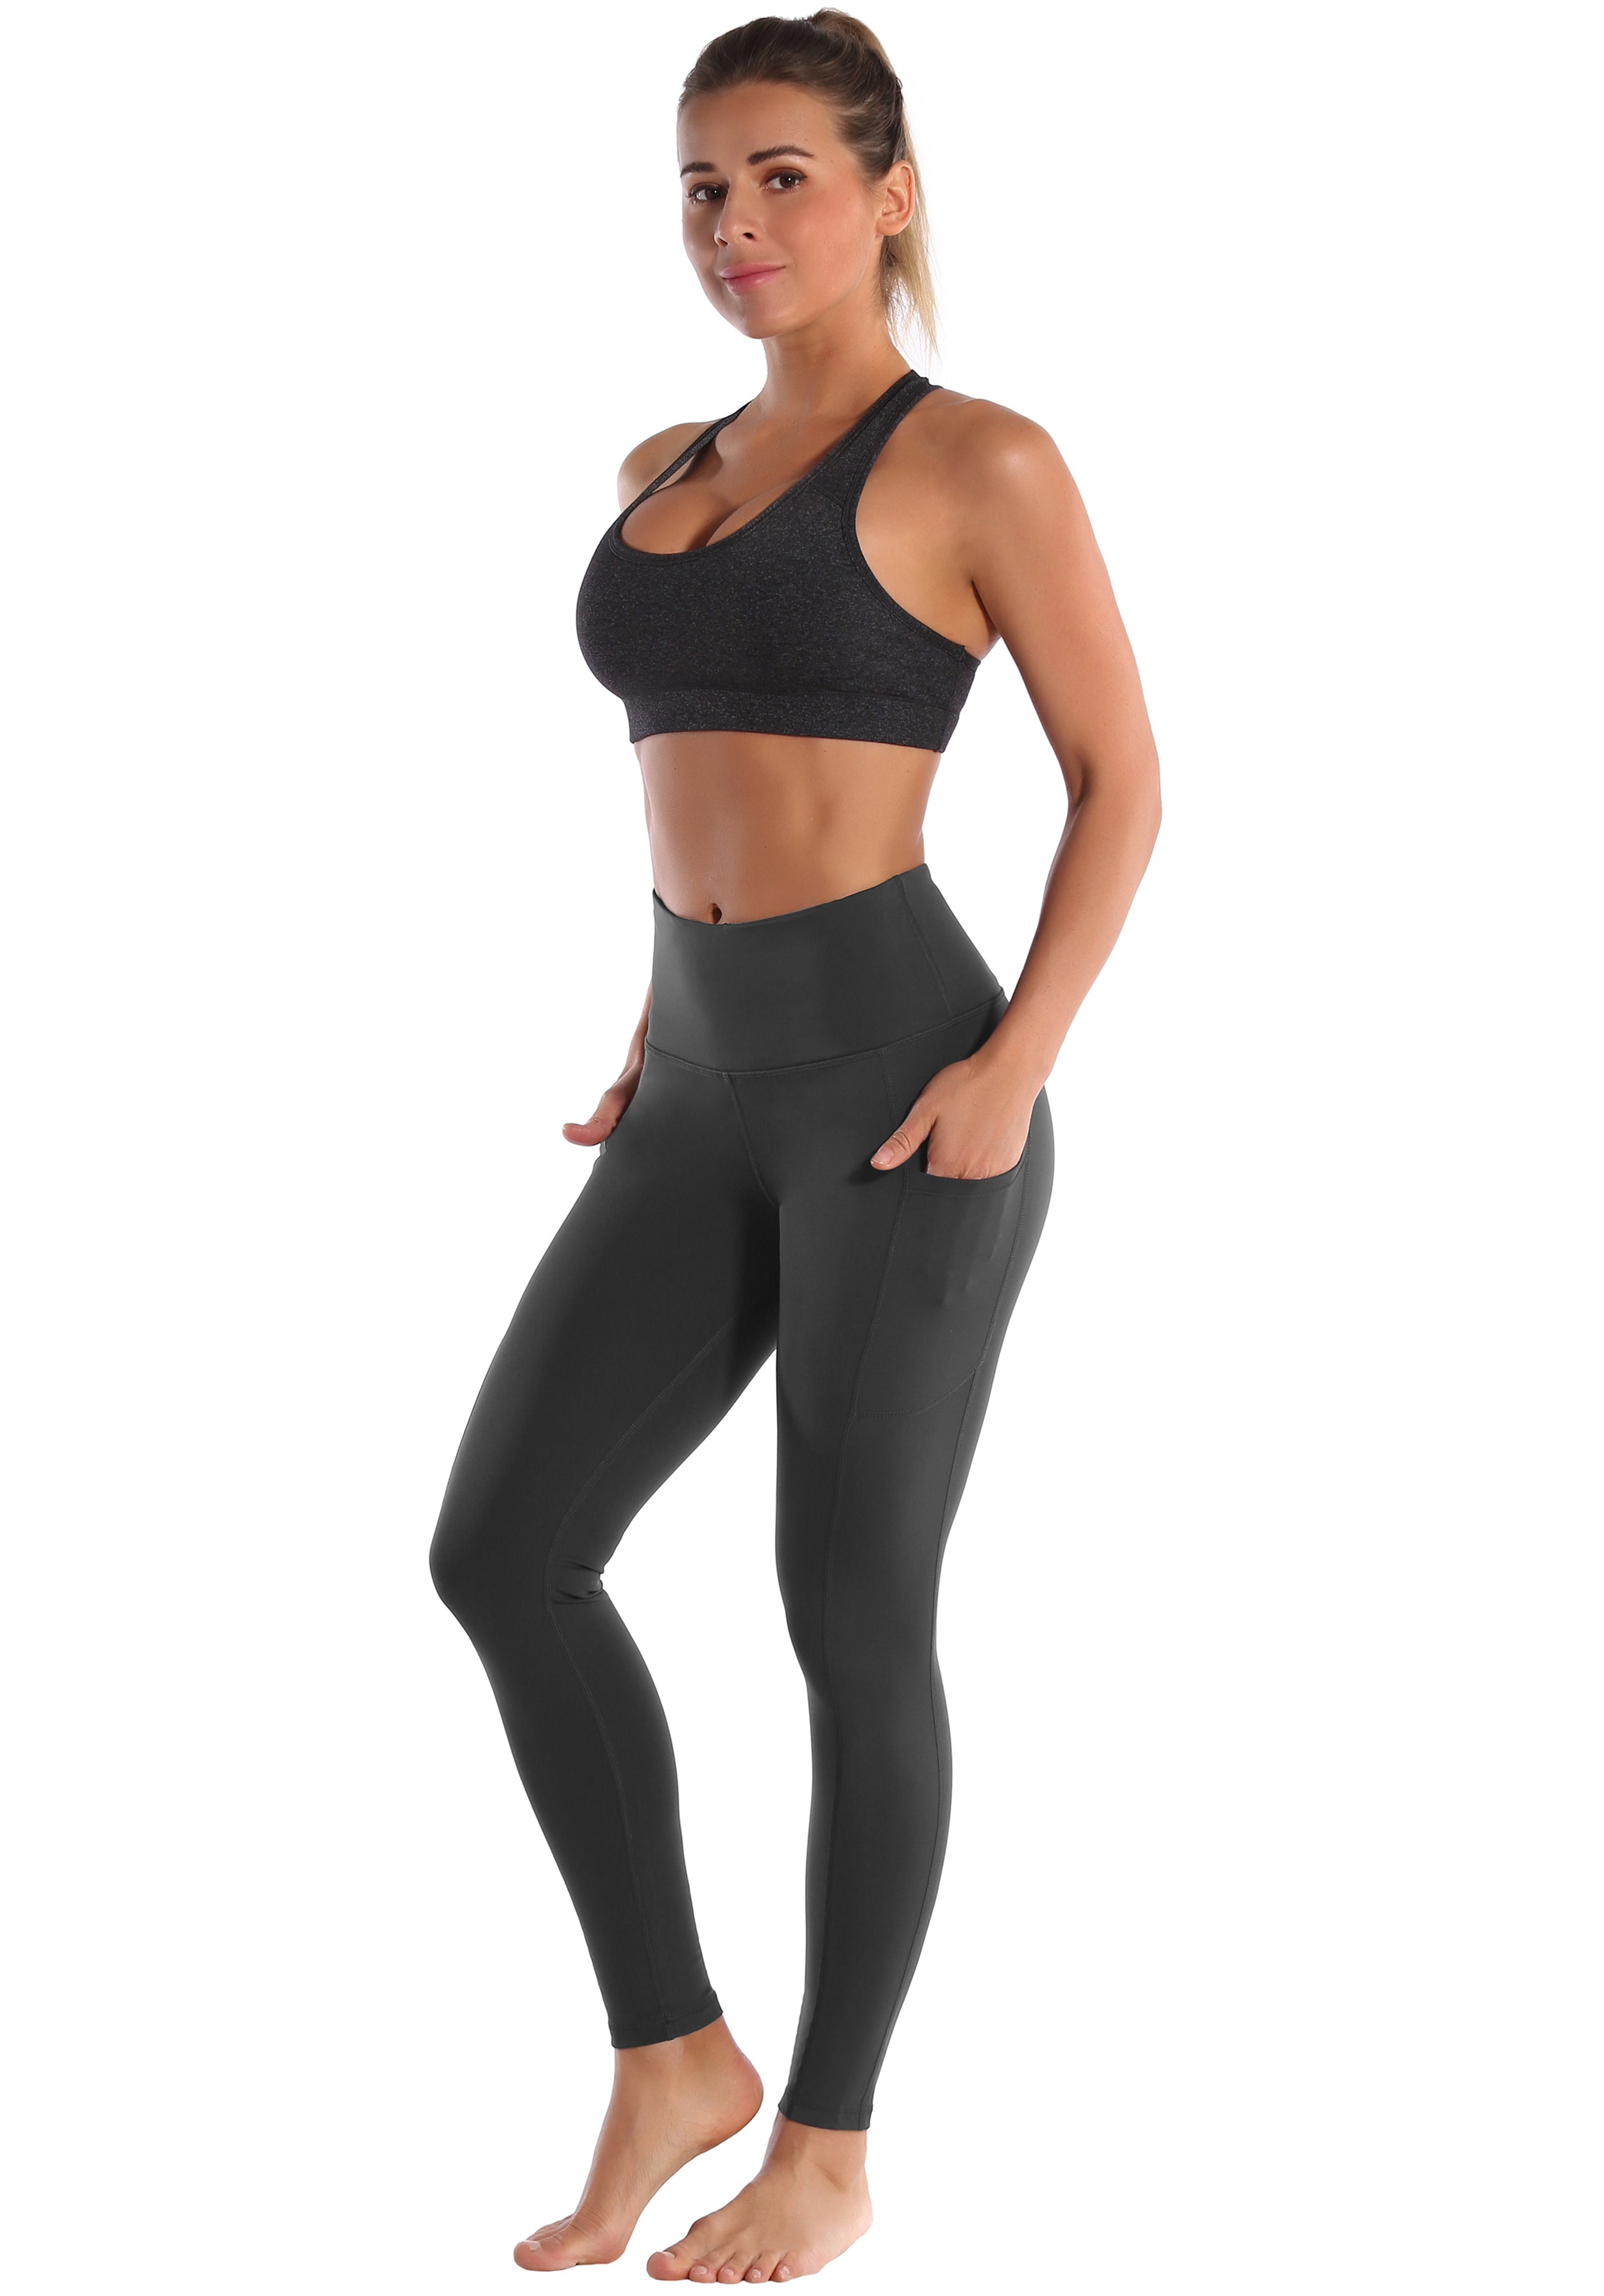 Hip Line Side Pockets Biking Pants shadowcharcoal Sexy Hip Line Side Pockets 75%Nylon/25%Spandex Fabric doesn't attract lint easily 4-way stretch No see-through Moisture-wicking Tummy control Inner pocket Two lengths